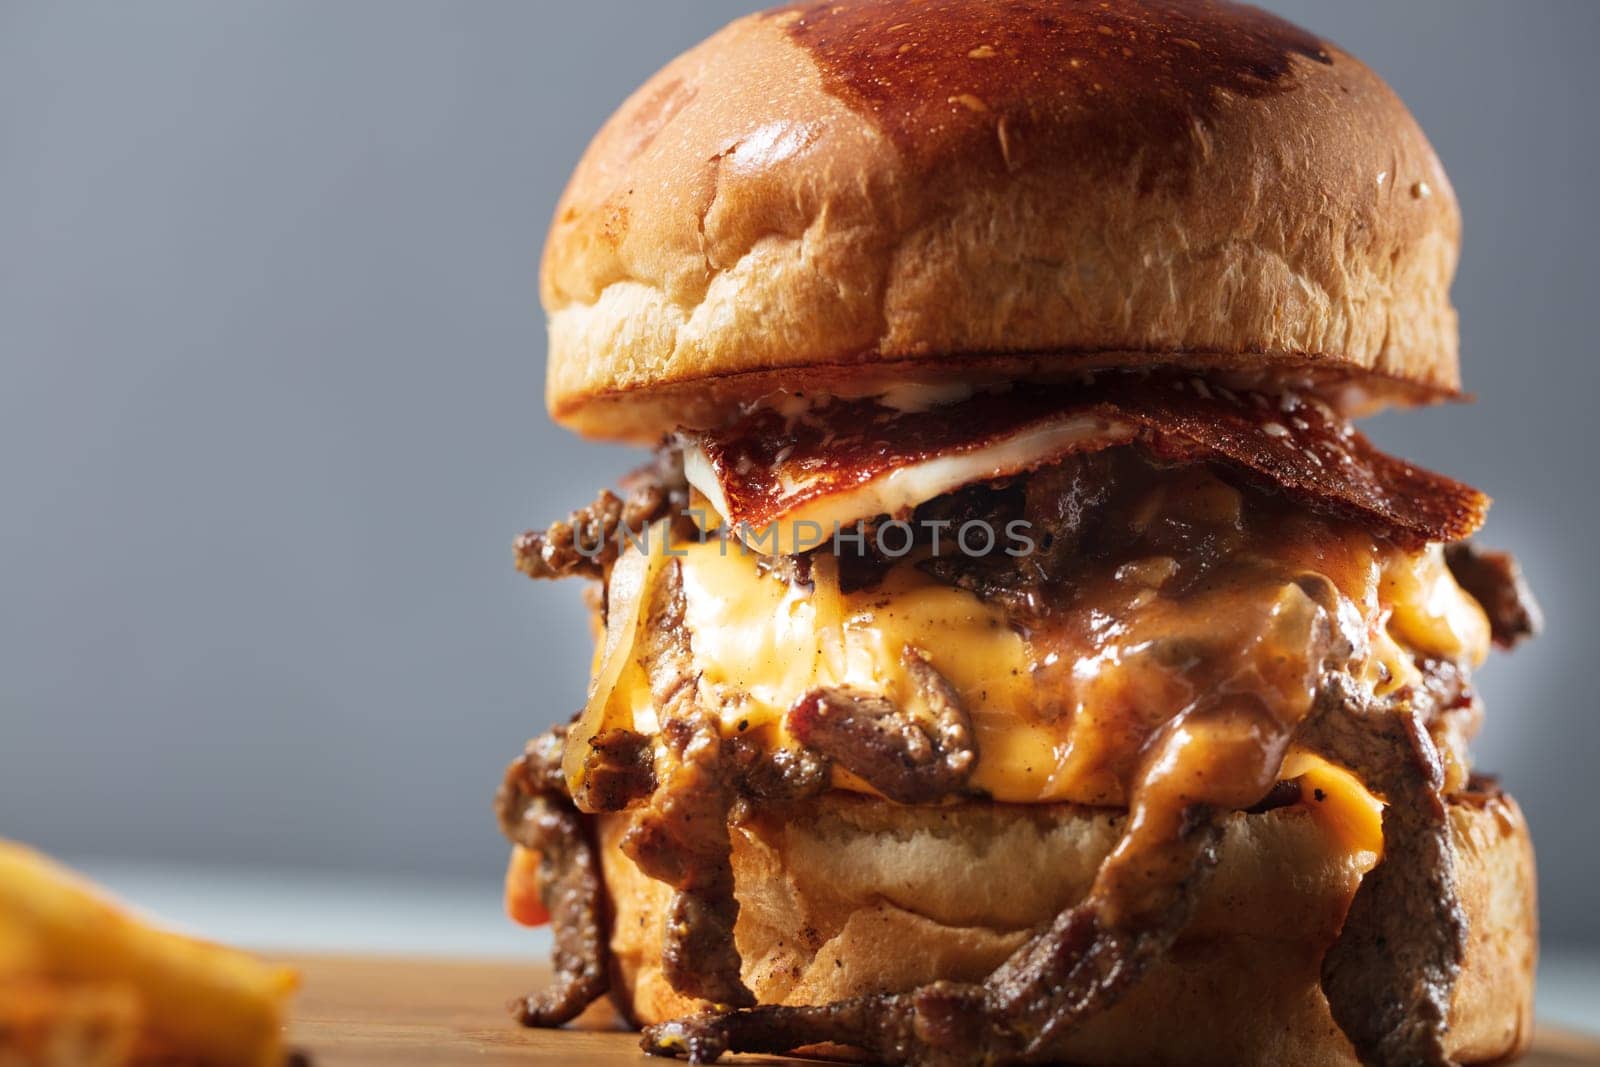 Double steak burger with smoked bacon, cheddar cheese and bbq sauce by senkaya